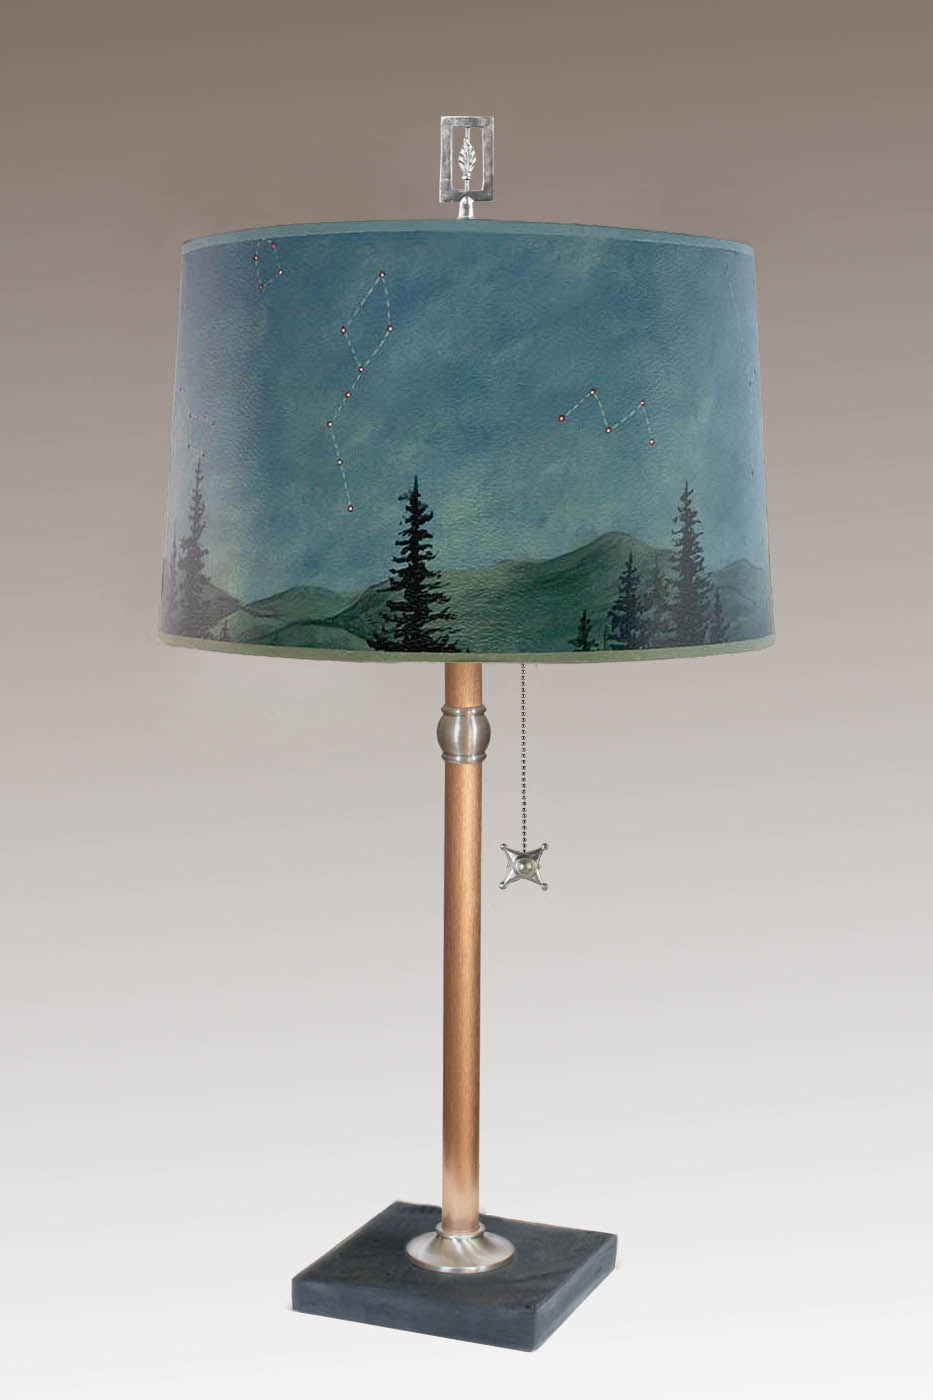 Janna Ugone & Co Table Lamps Copper Table Lamp with Large Drum Shade in Midnight Sky